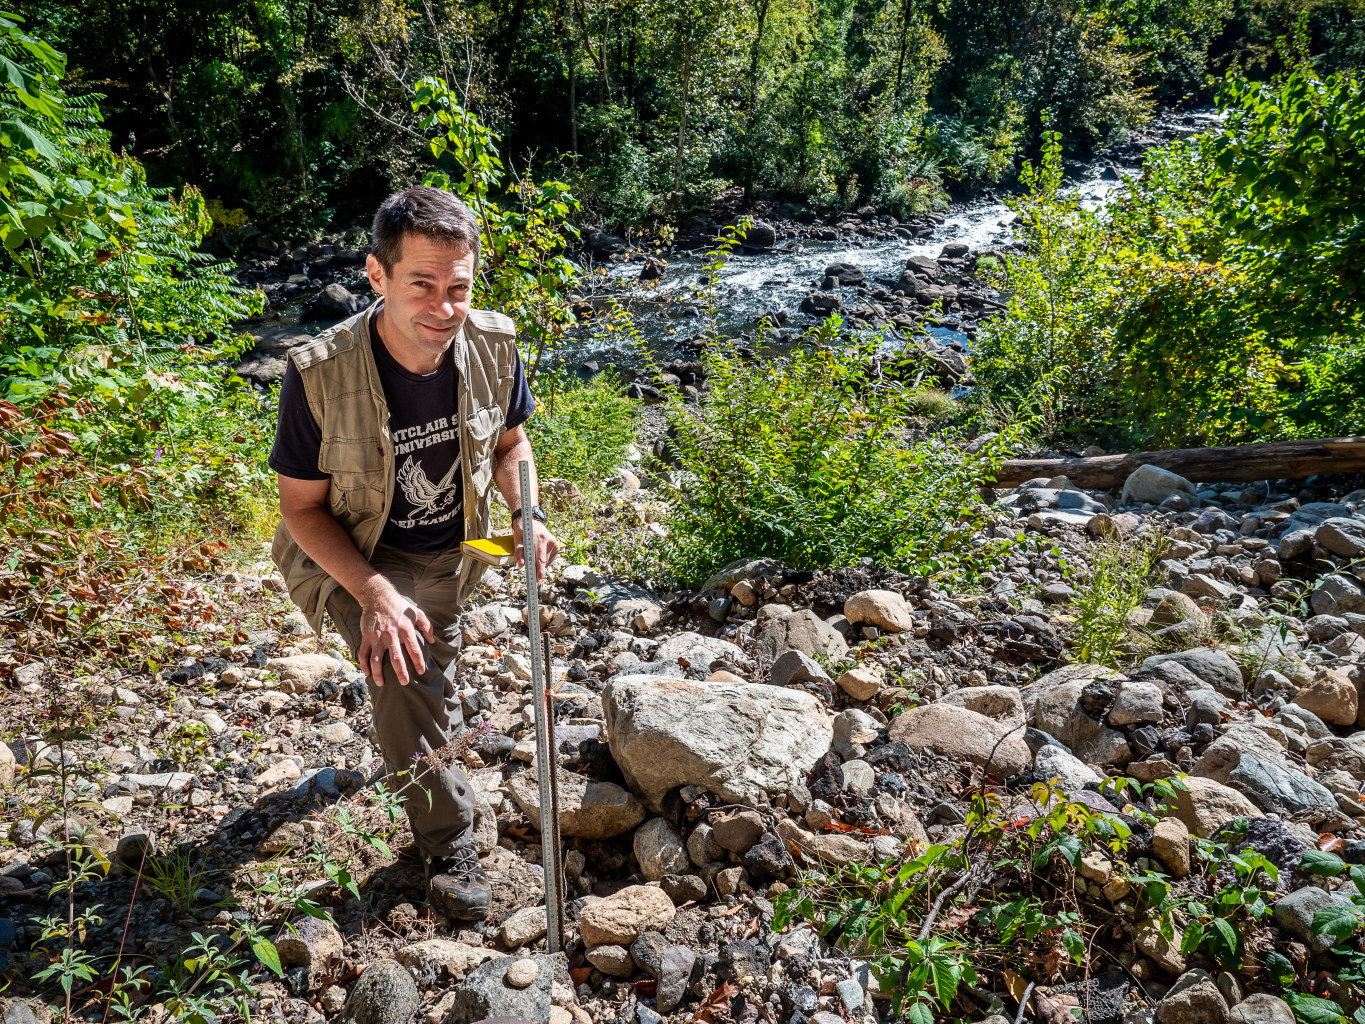 Joshua Galster studies how land use and climate change affect rivers and streams.